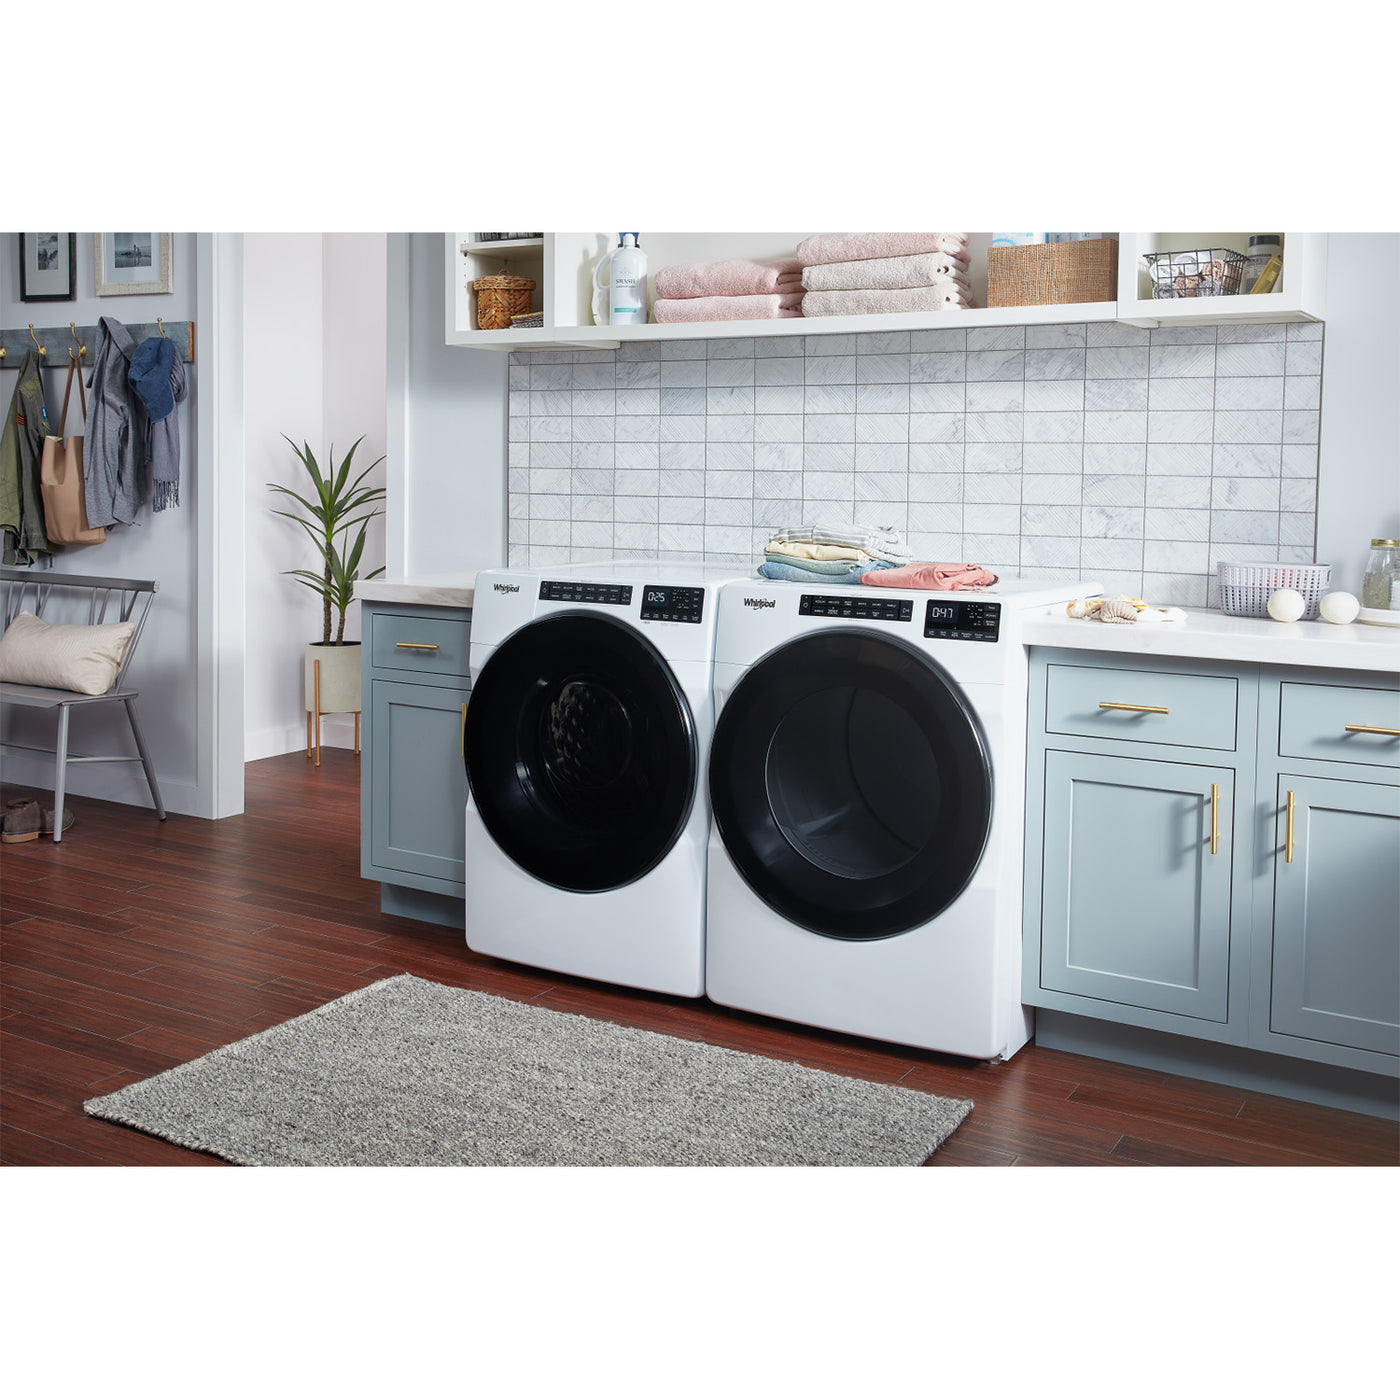 Whirlpool White Front-Load Washer (5.2 cu. ft.) & Electric Dryer (7.4 cu. ft.) - WFW5605MW/YWED6605MW